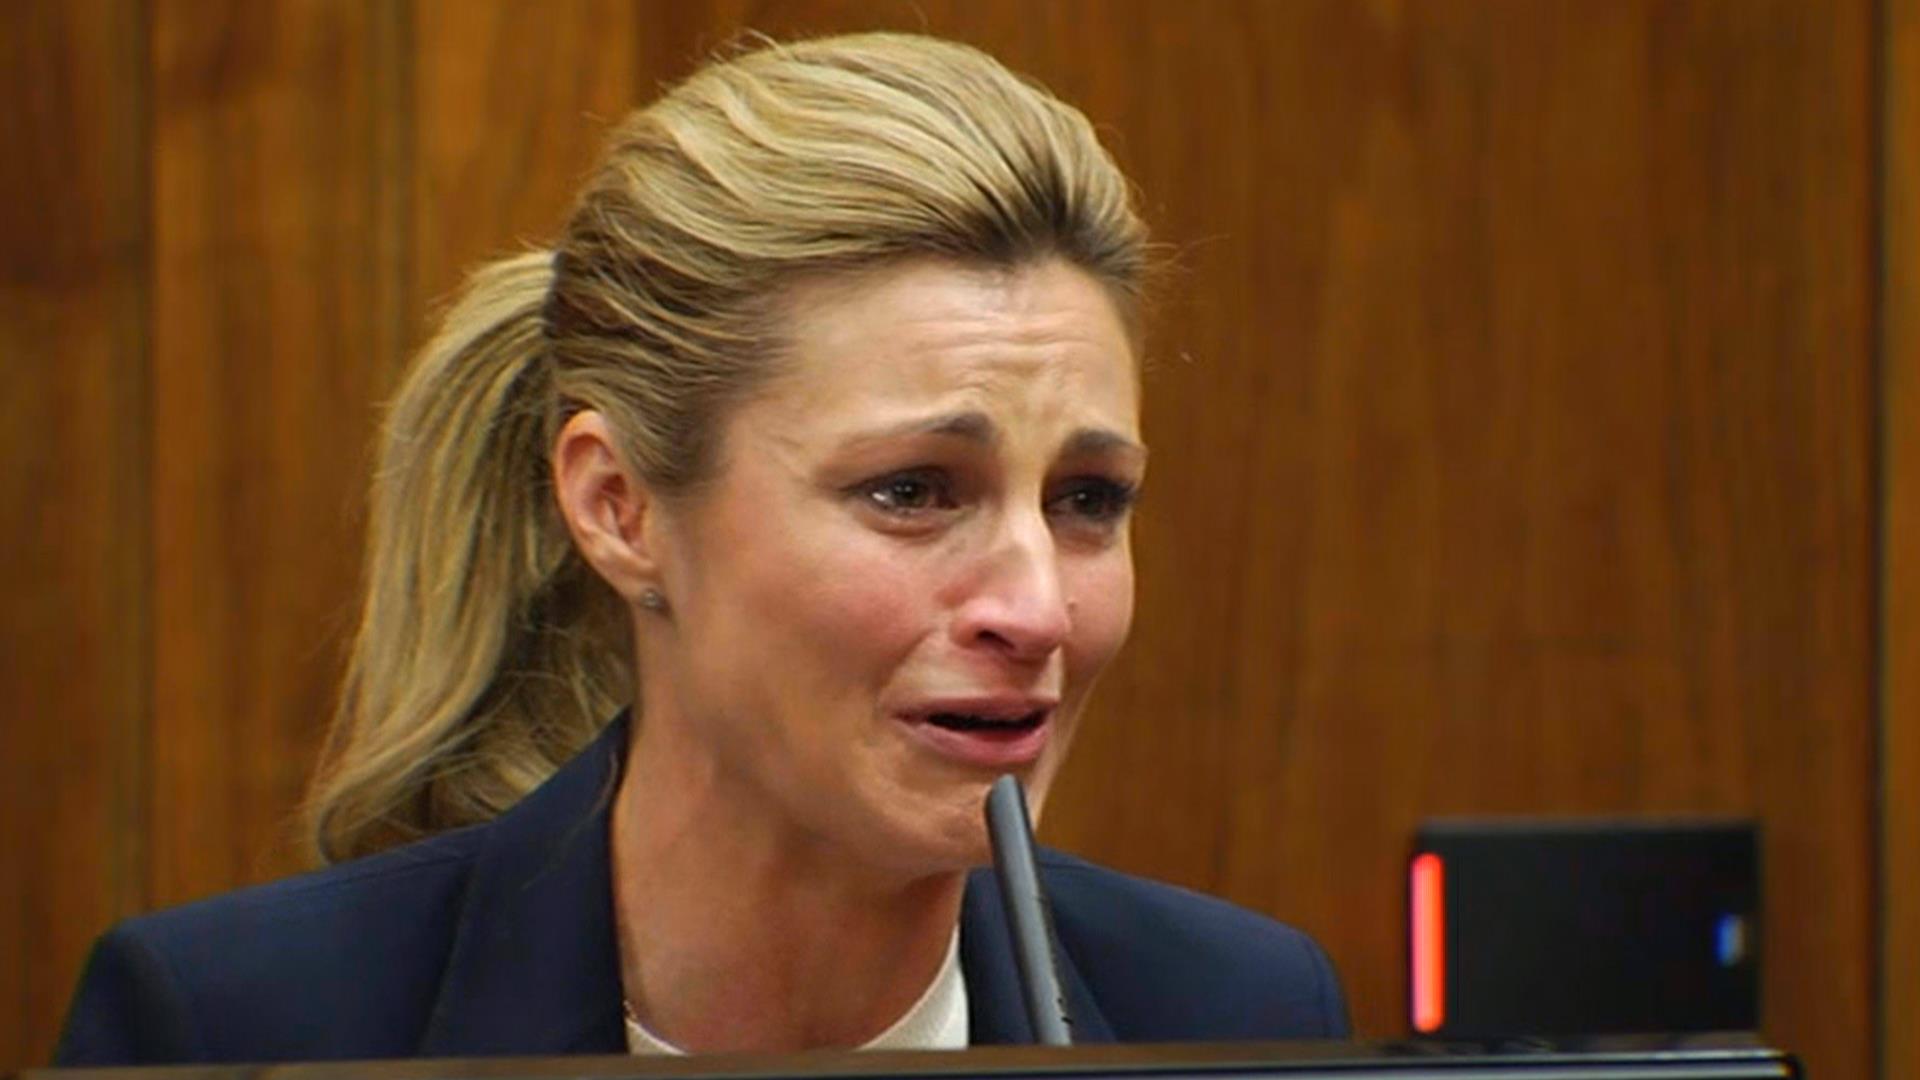 Erin andrews leaked pictures